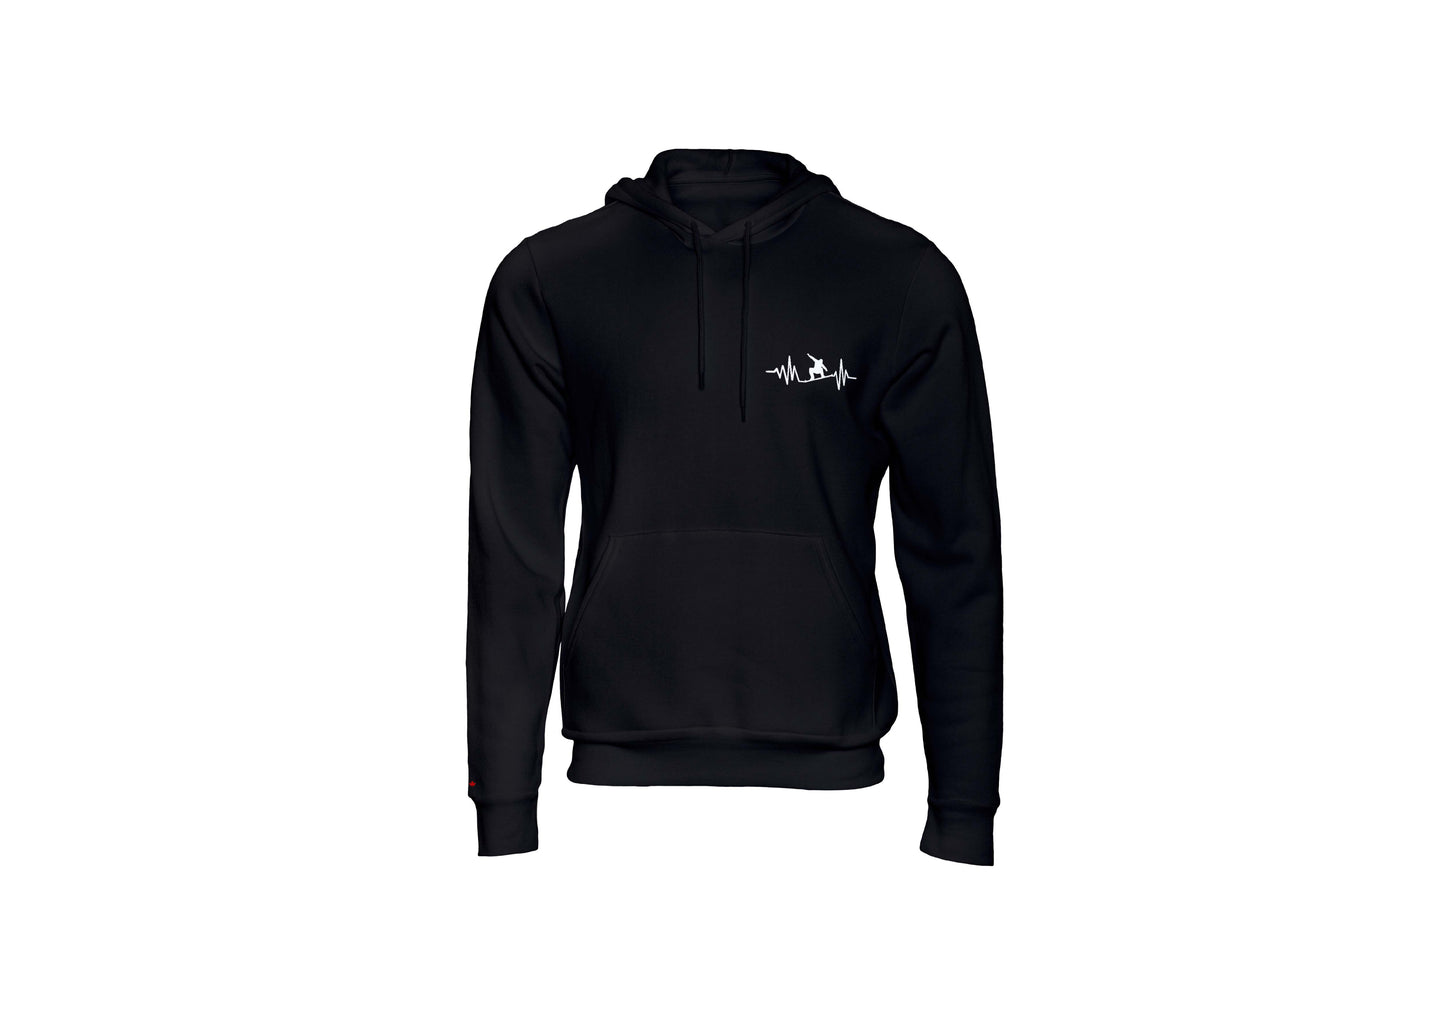 CLASSIC HOODIE - Snowboarder & Mountain Tops